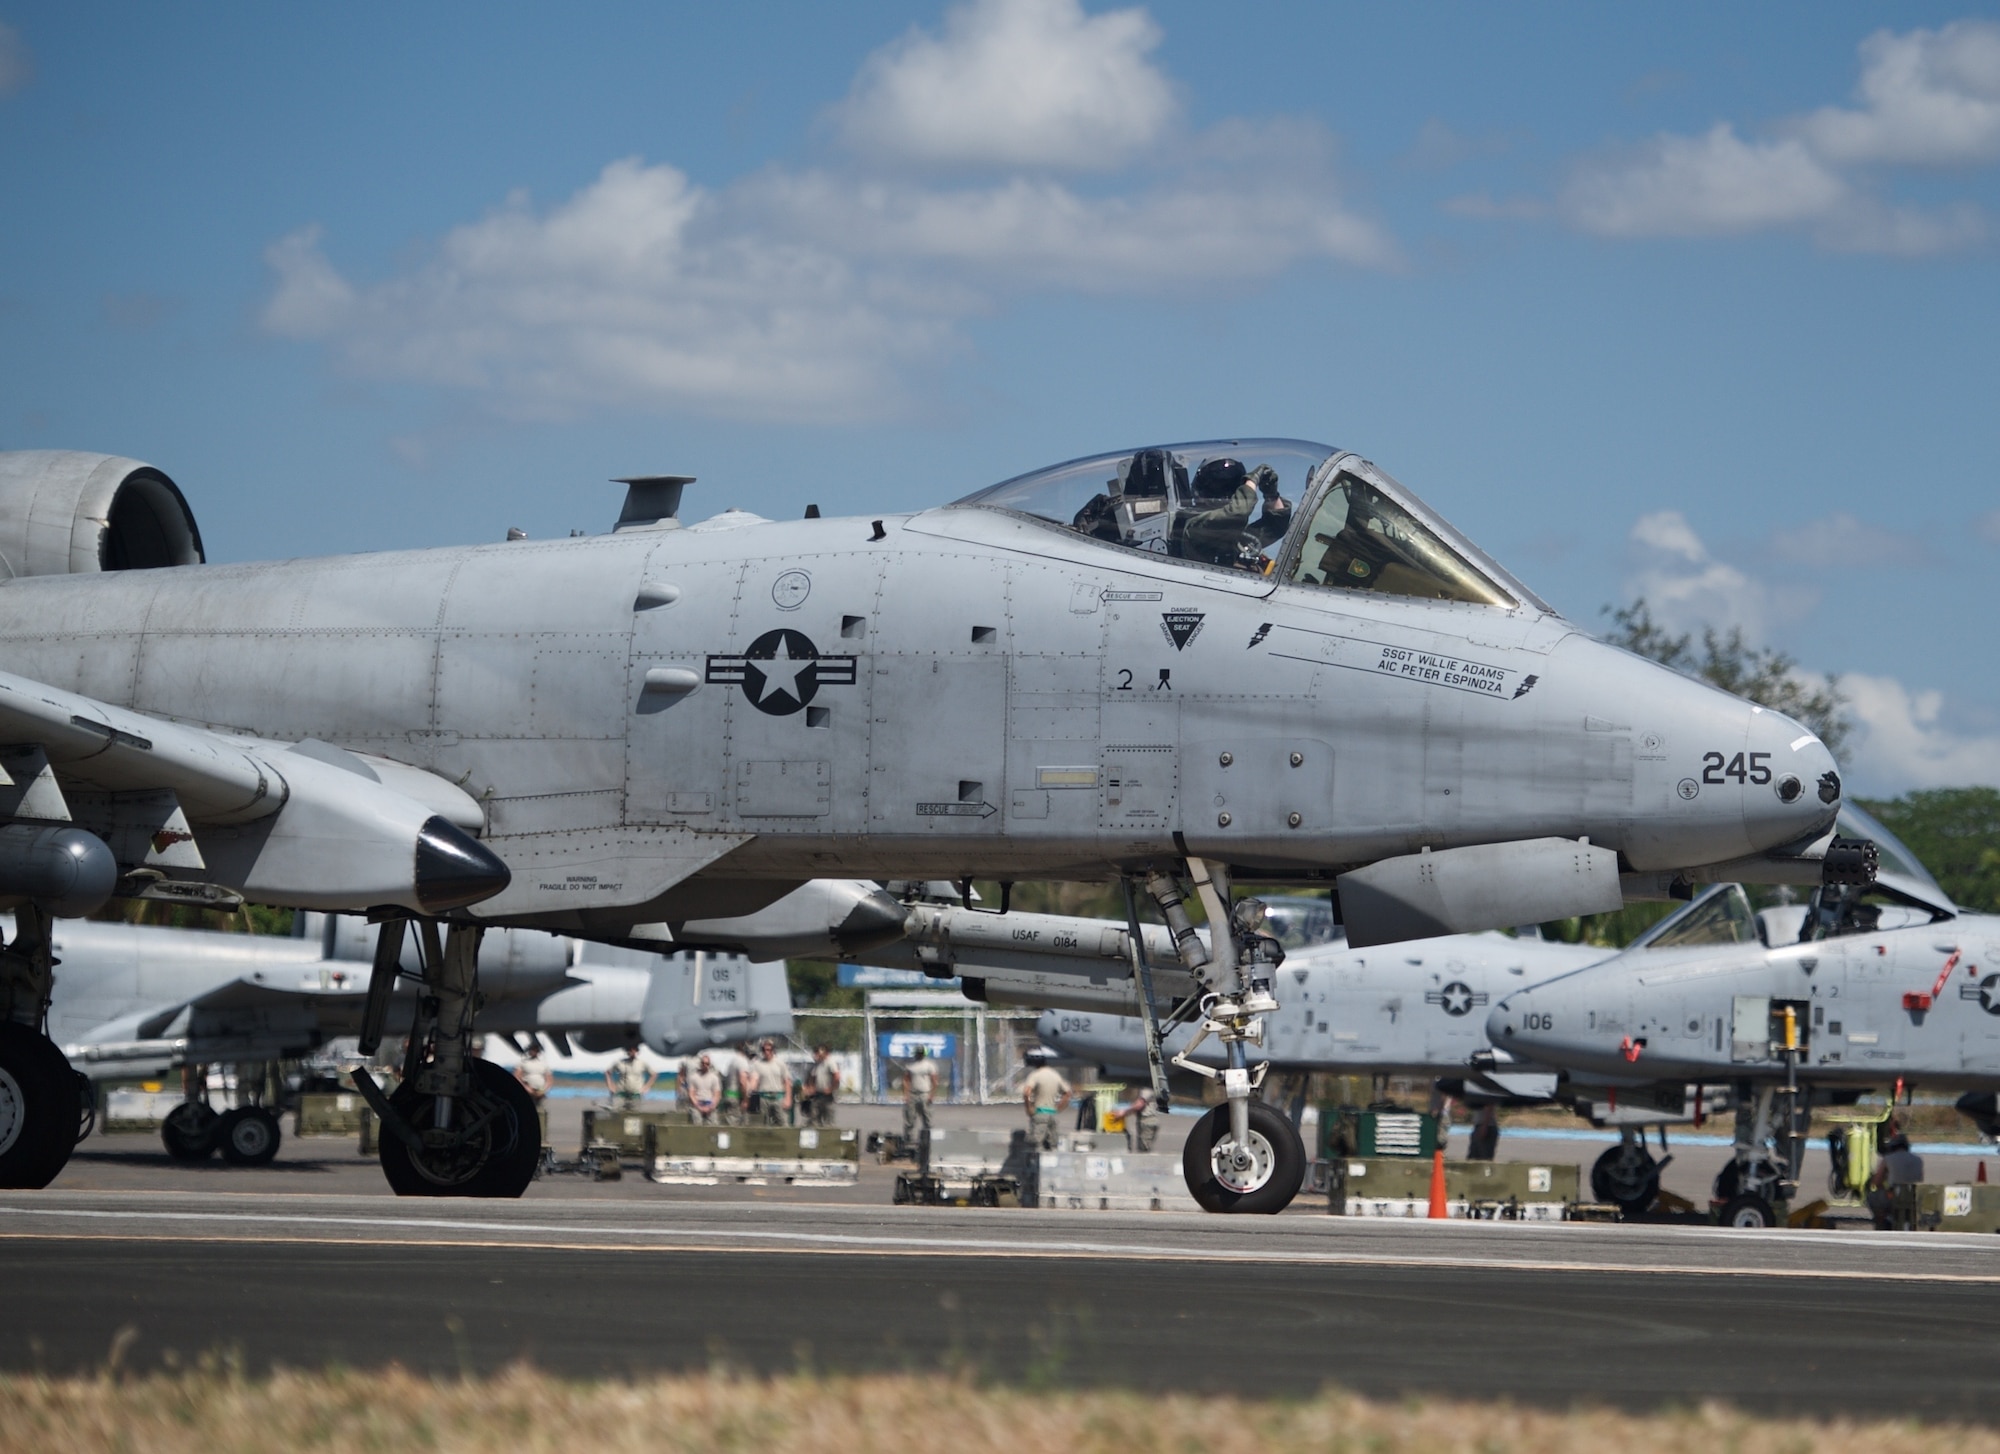 U.S. Air Force Capt. Chris Elmstedt, an A-10C Thunderbolt II pilot from the 25th Fighter Squadron, Osan Air Base, Republic of Korea, taxies the aircraft in preparation for takeoff at Clark Air Base, Philippines, April 21, 2016. The pilots and aircraft conducted a mission flying in the vicinity of Scarborough Shoal in order to provide greater and more transparent air and maritime situational awareness to ensure safety for military and civilian activities in international waters and airspace. Elmstedt is deployed along with five A-10Cs, three HH-60G Pave Hawks and approximately 200 Airmen from various Pacific Air Forces bases in support of U.S. Pacific Command’s first Air Contingent. (U.S. Air Force photo by Capt. Susan Harrington)